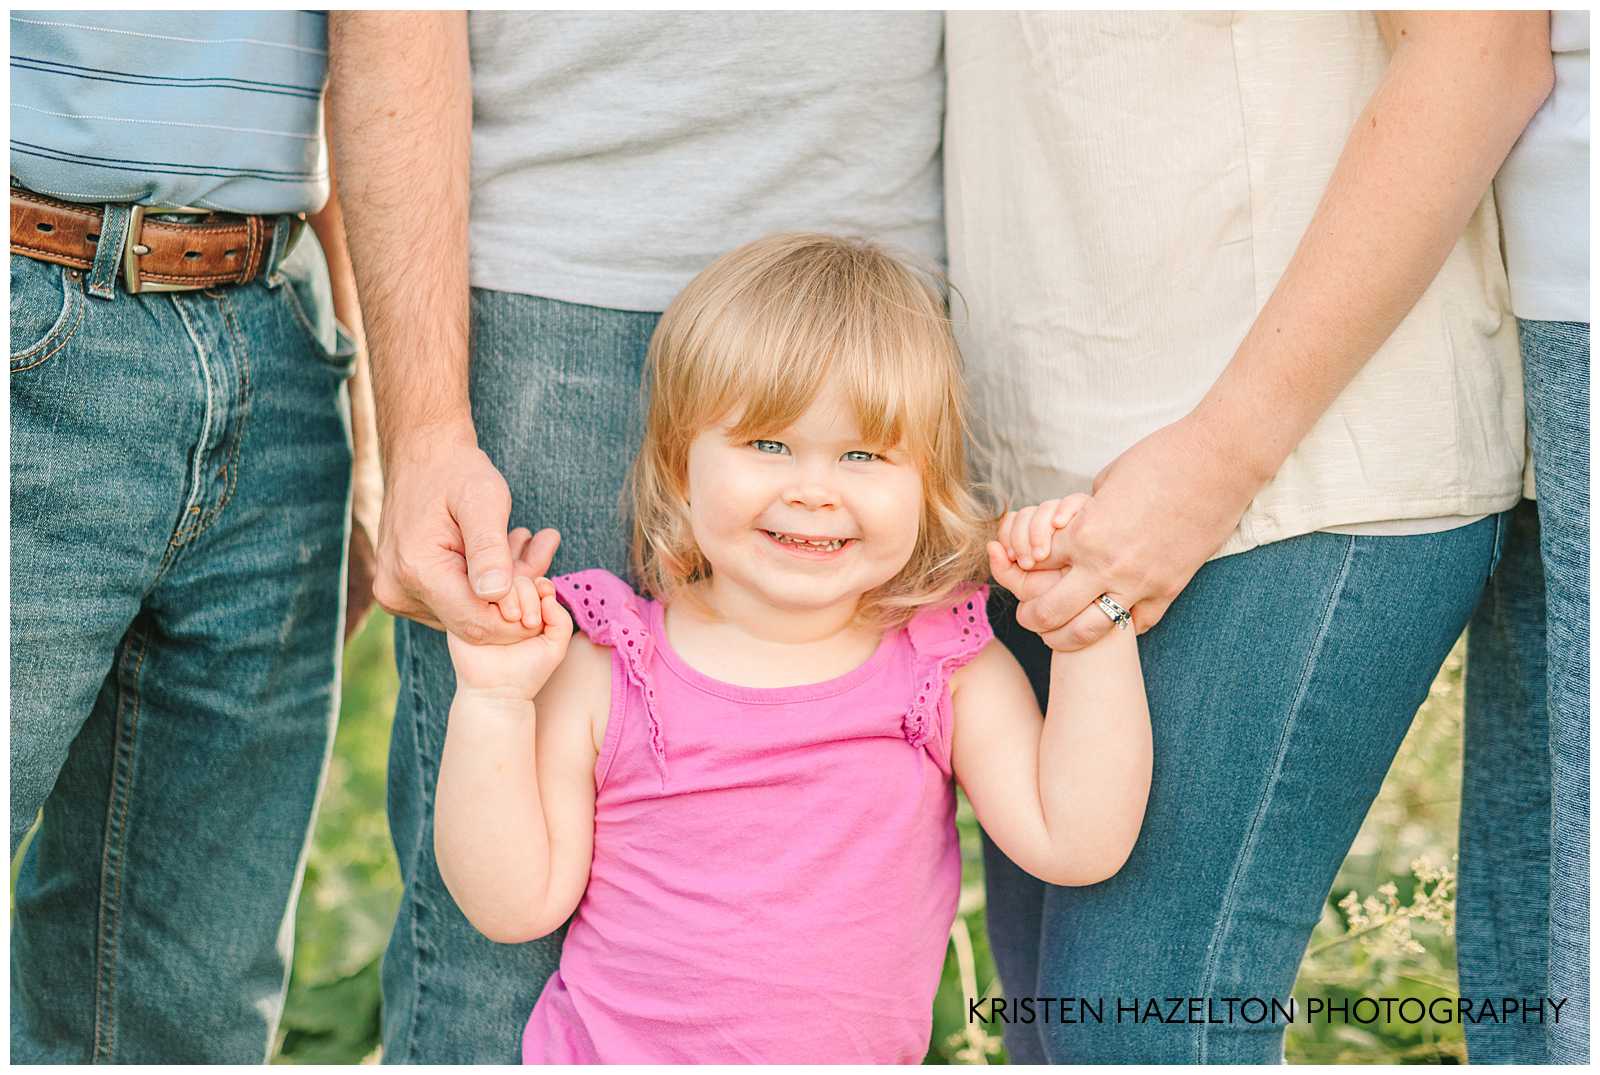 closeup of a toddler girl with a pink shirt holding her parents' hands.